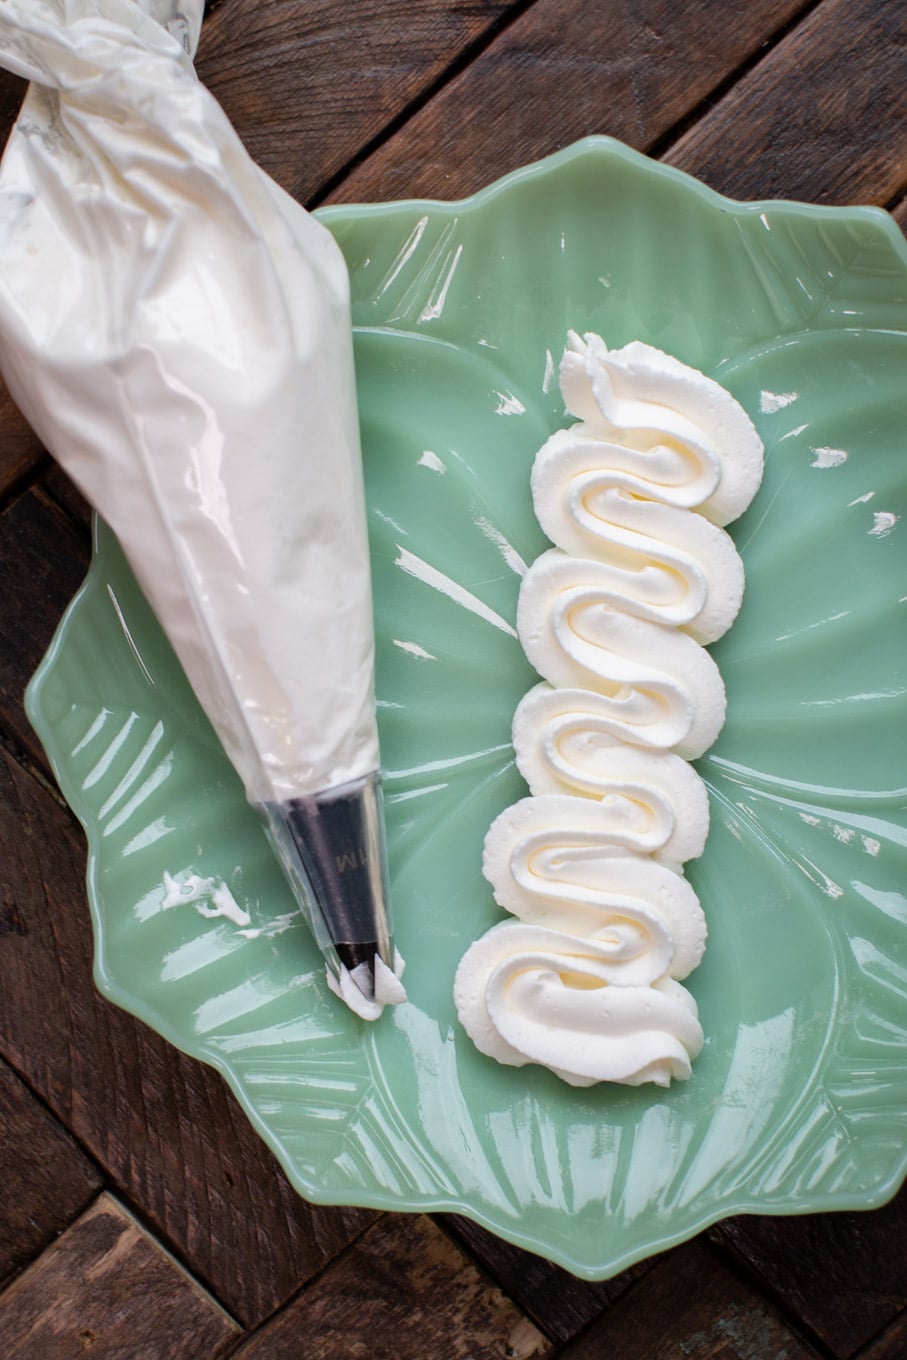 piped whipped cream on jadeite plate.